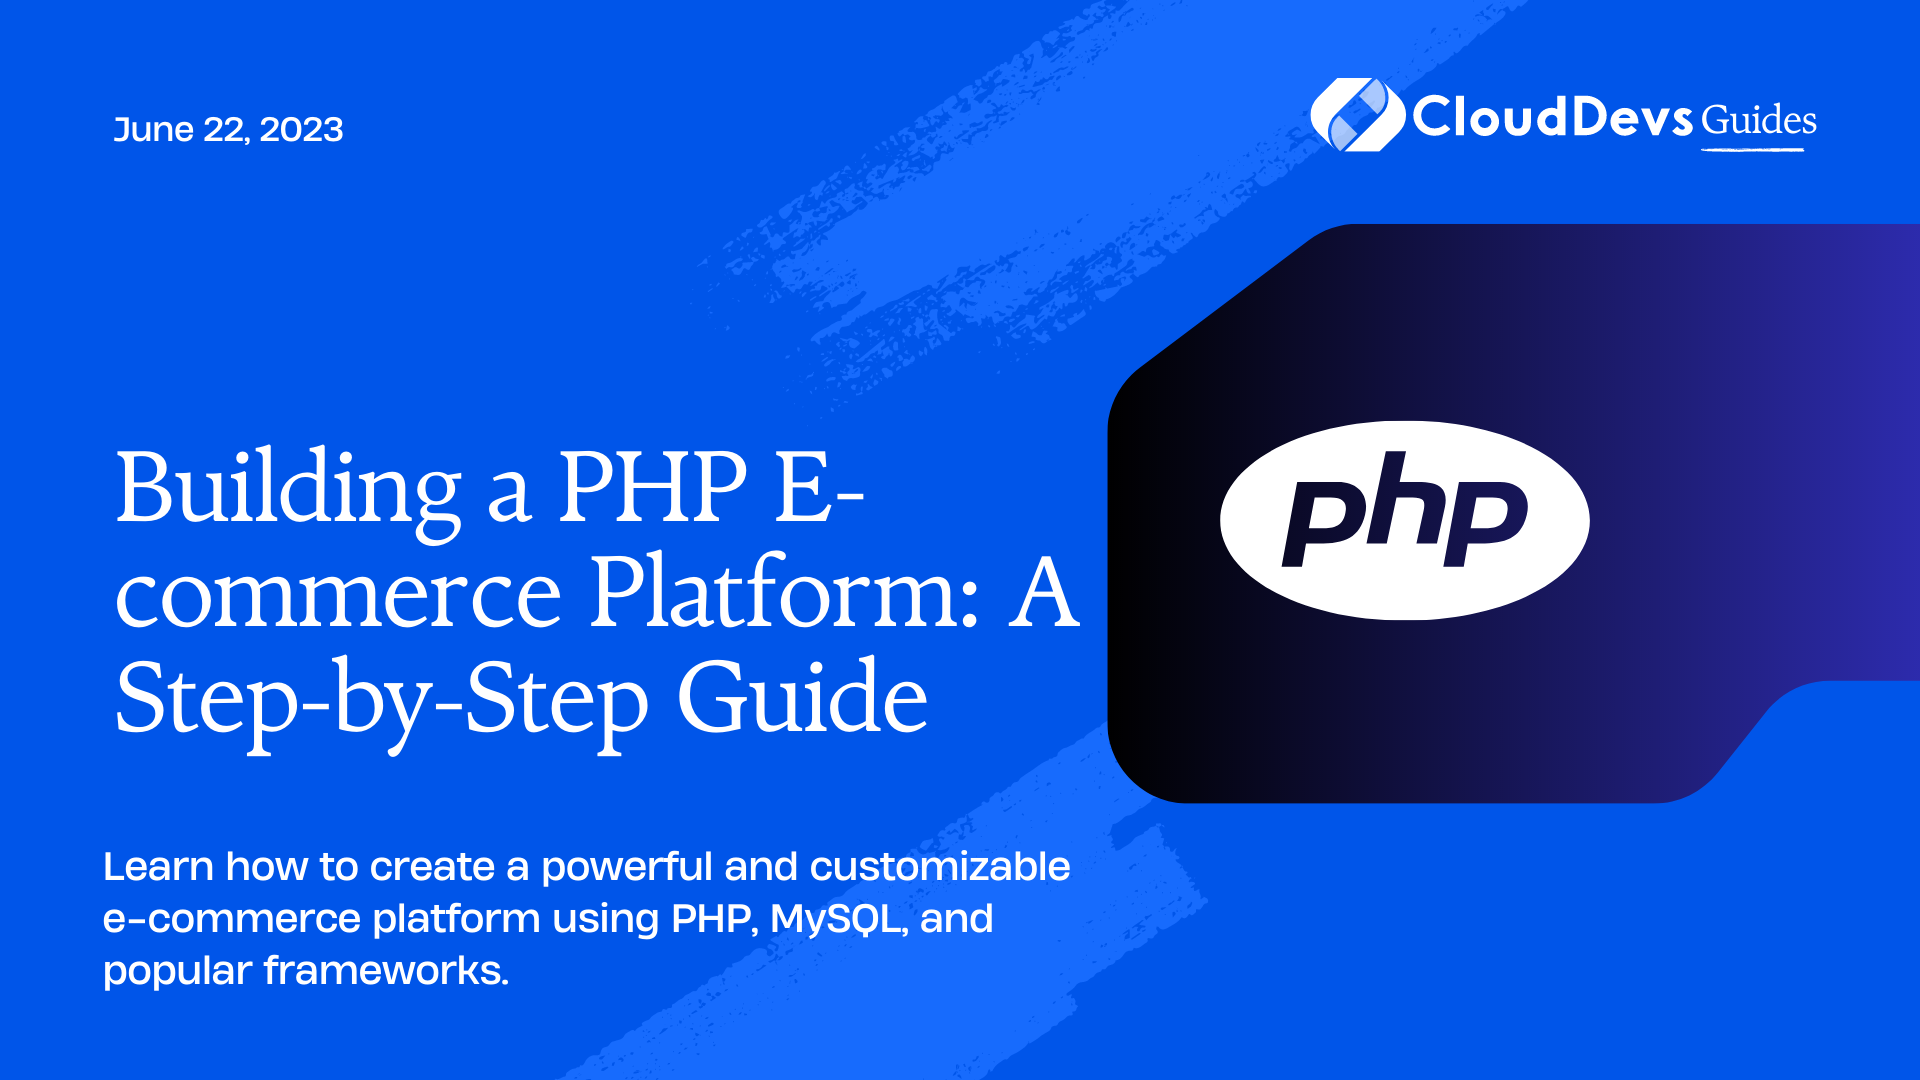 Building a PHP E-commerce Platform: A Step-by-Step Guide